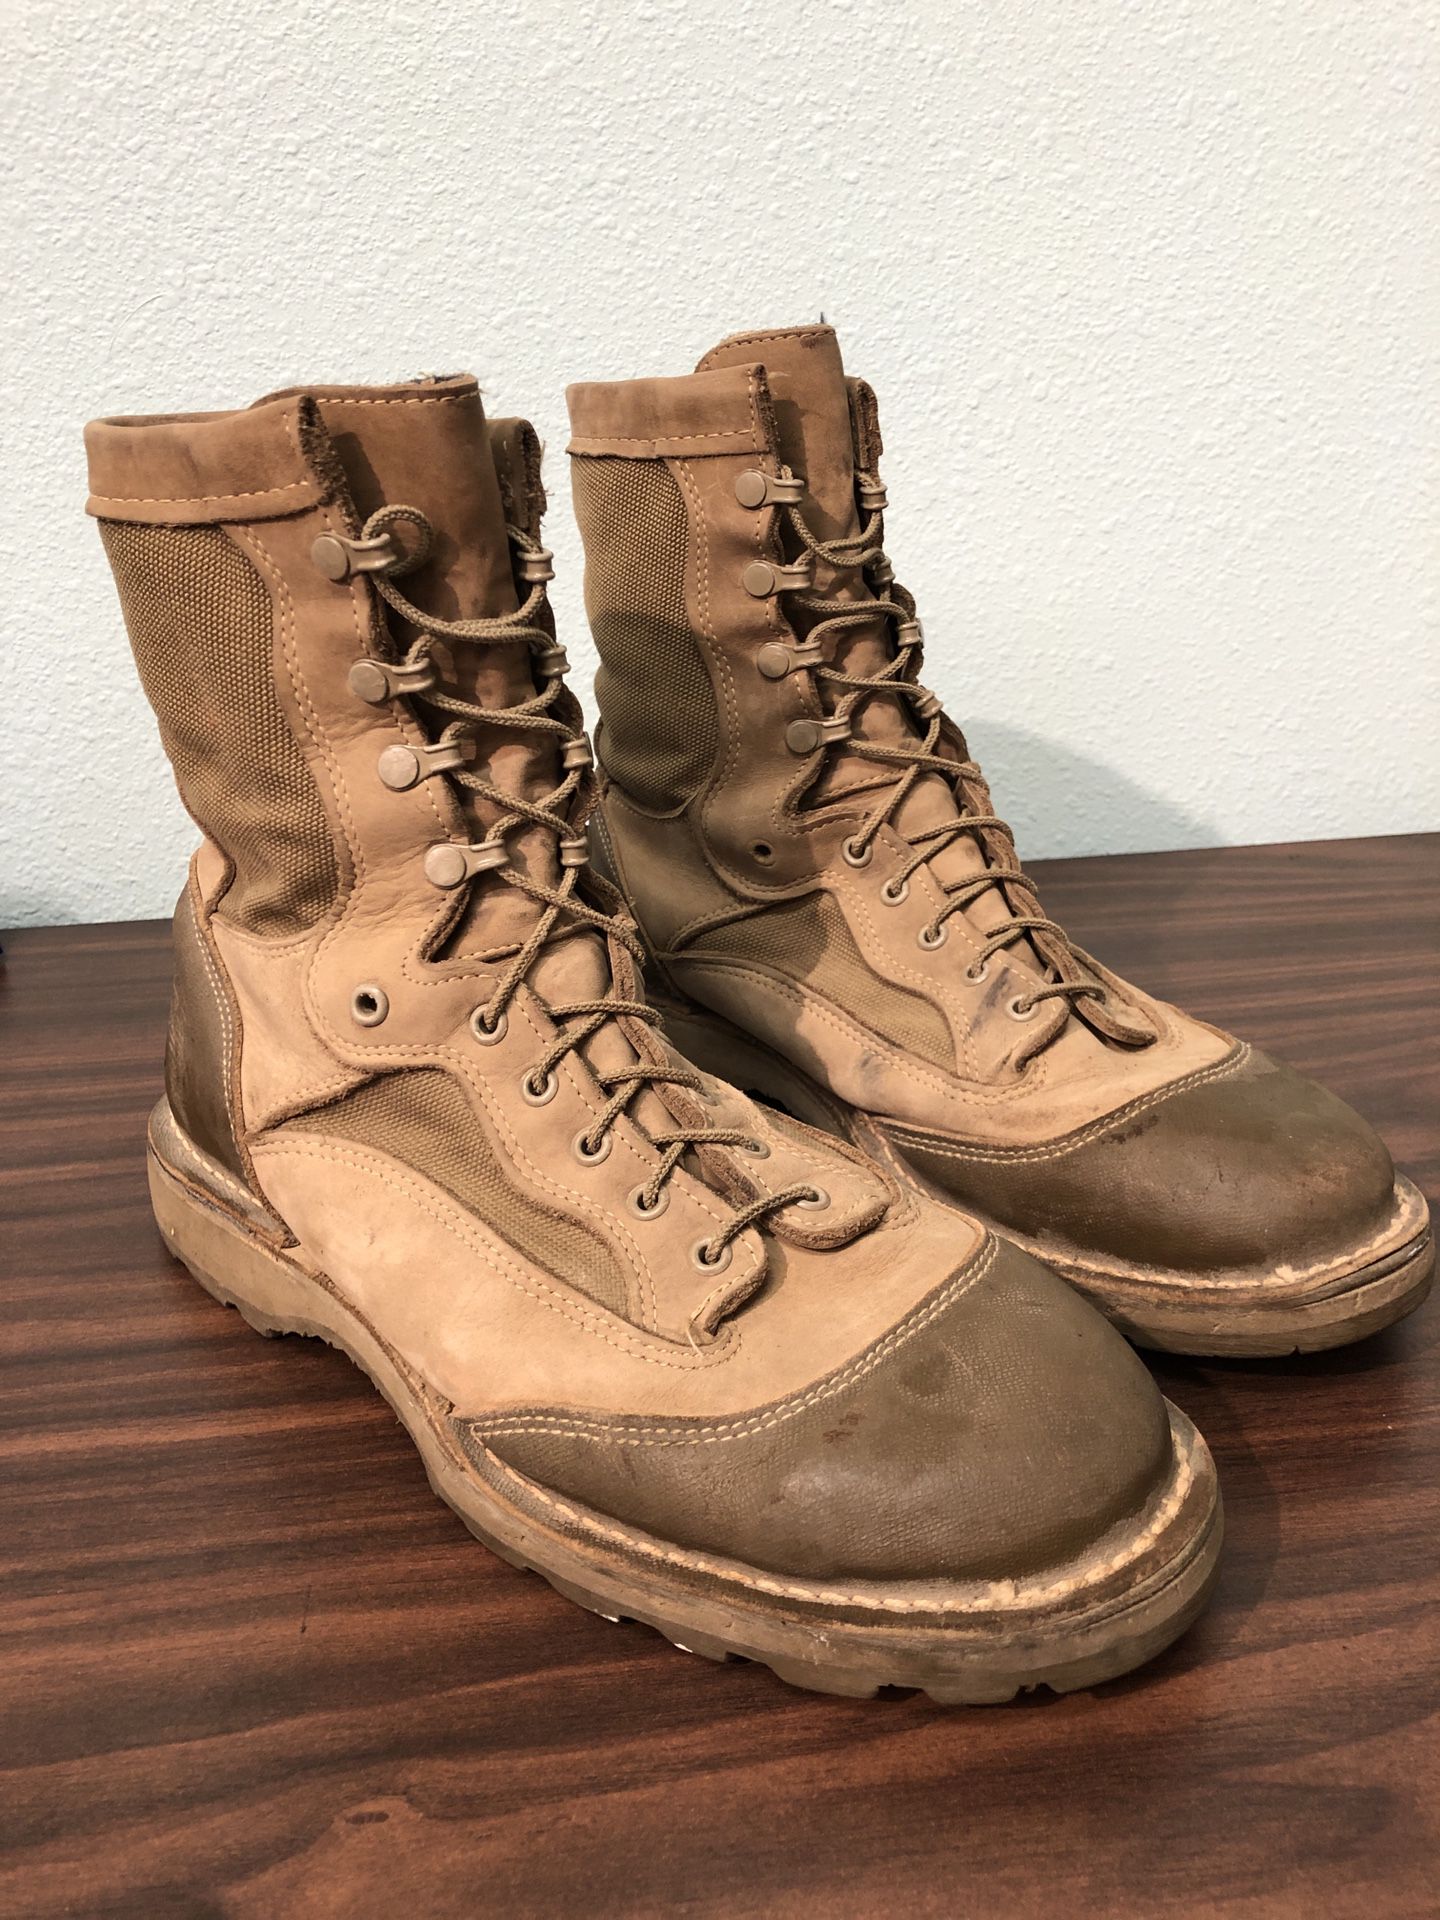 Men’s Wellco Size 12 Work Boots